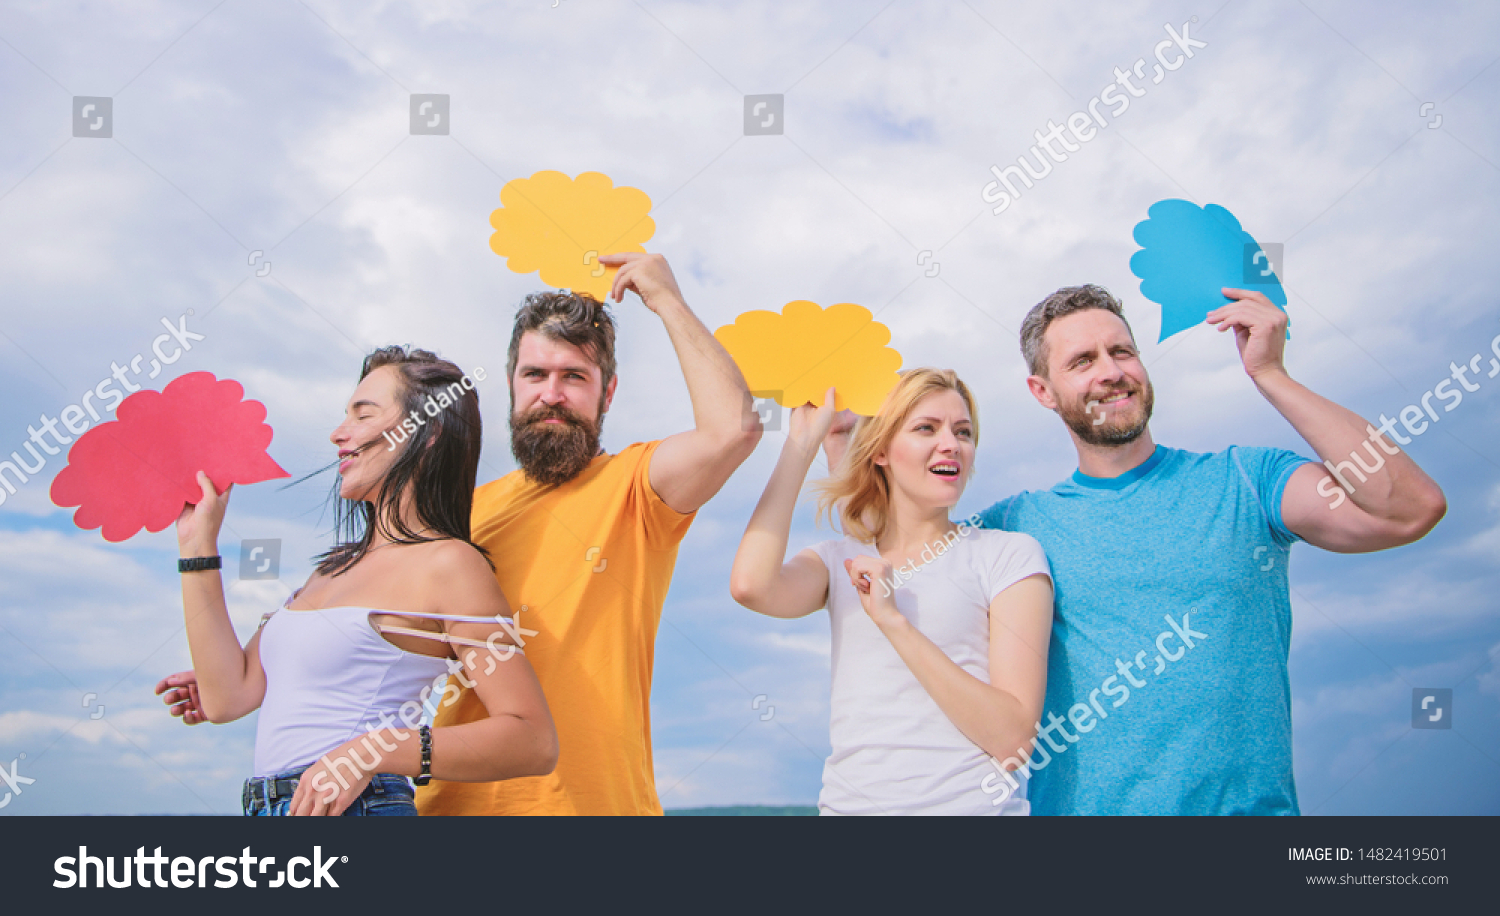 Information sharing and coordination. People speak using speech bubbles. Friends send messages on comic bubbles. Group communication pleasure. Communication occurs through speech balloons, copy space. #1482419501